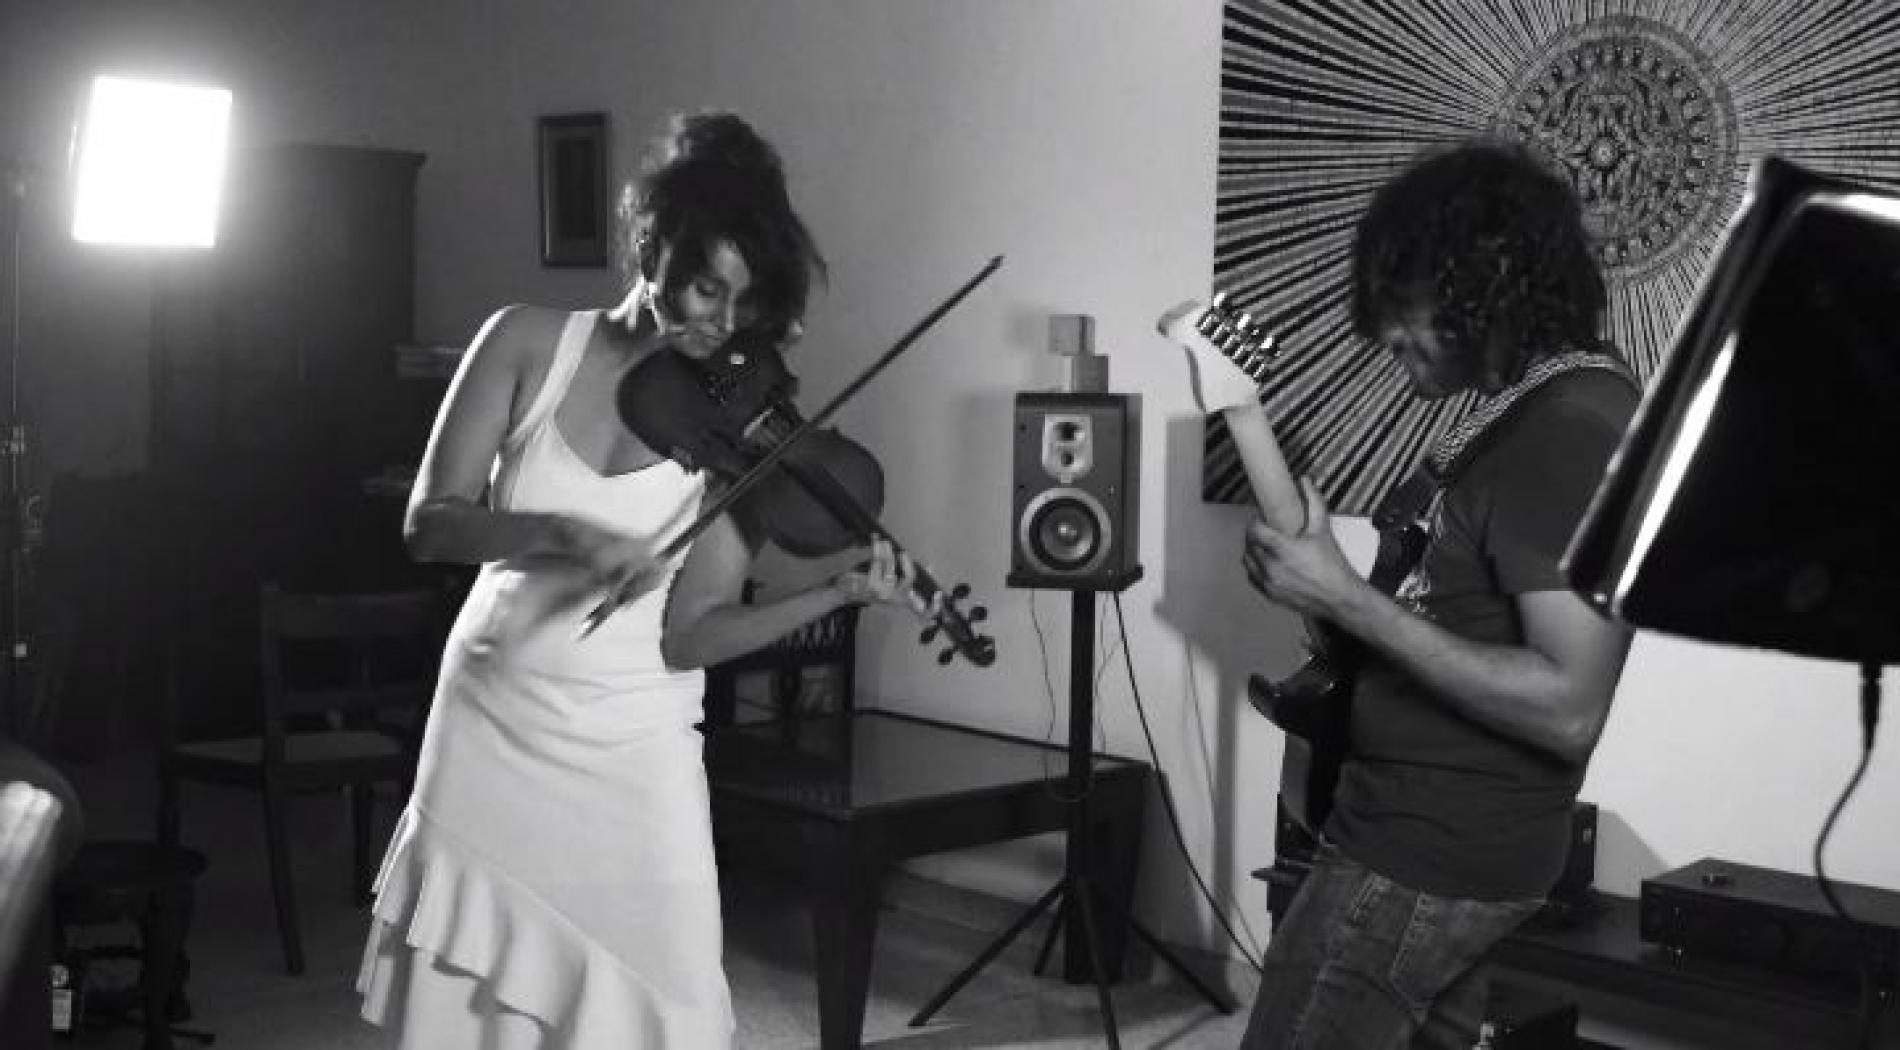 New Music : Sweet Child O’ Mine – Guns n’ Roses (Violin Cover) Mad Violinist Ft Andrew Obeyesekere